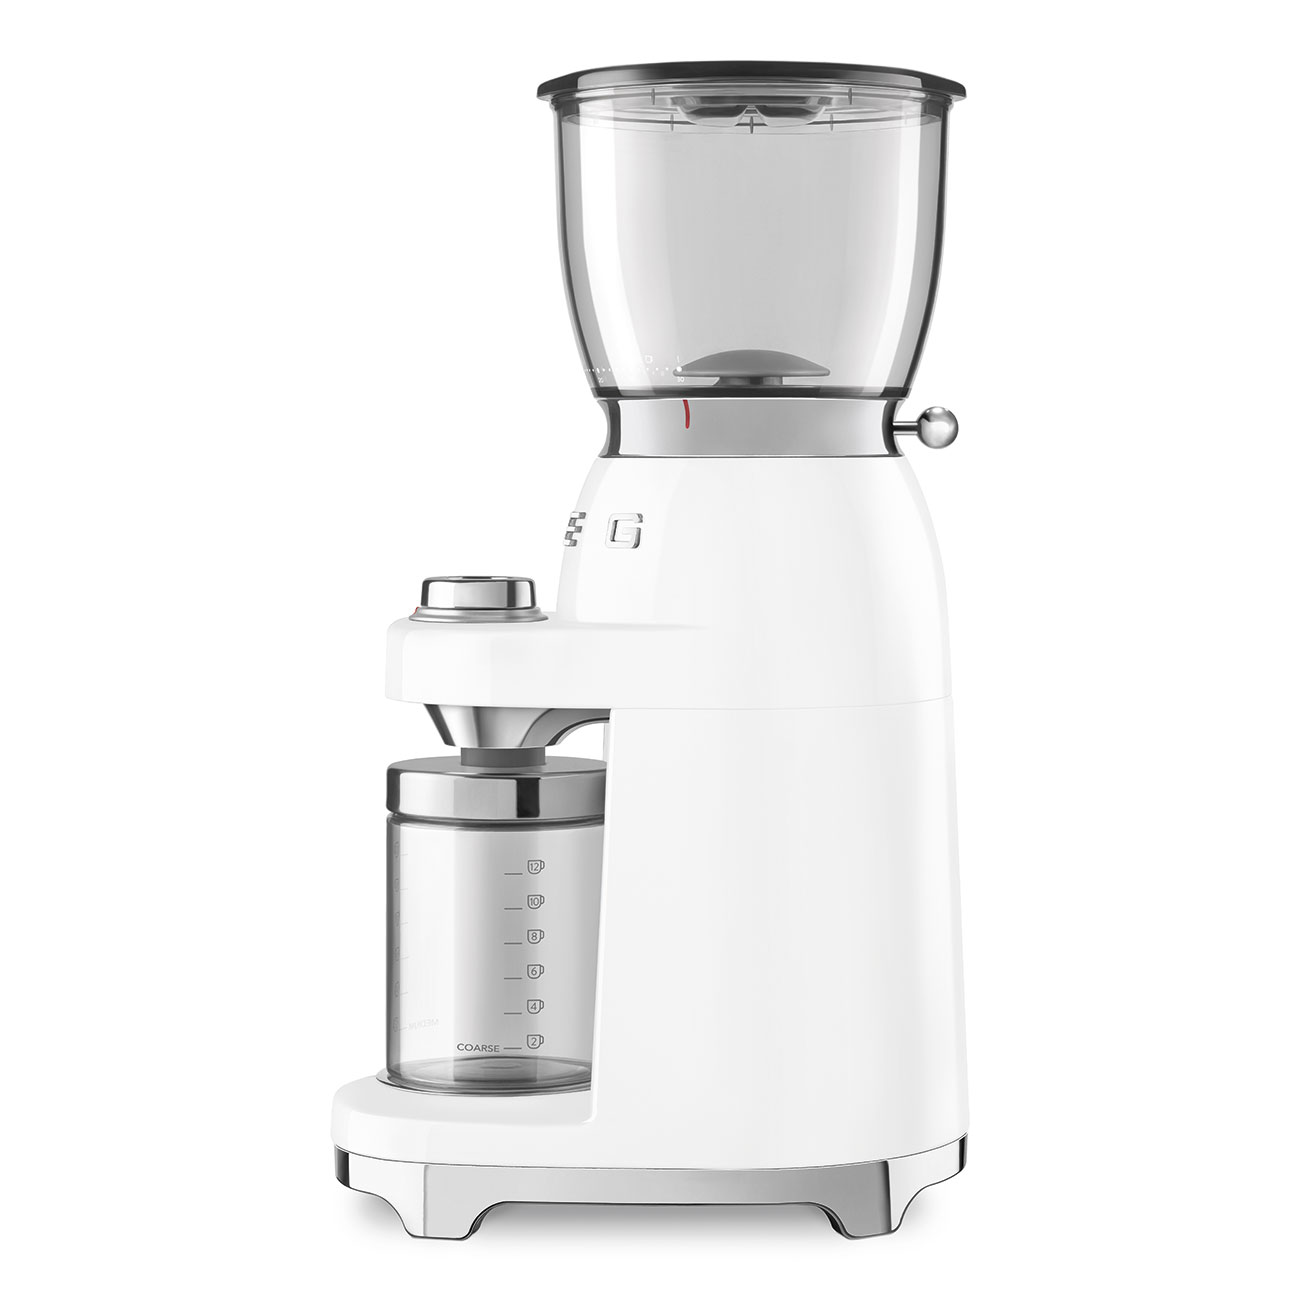 White Coffee Grinder featuring a conical burr - CGF11WHUK - Smeg_2